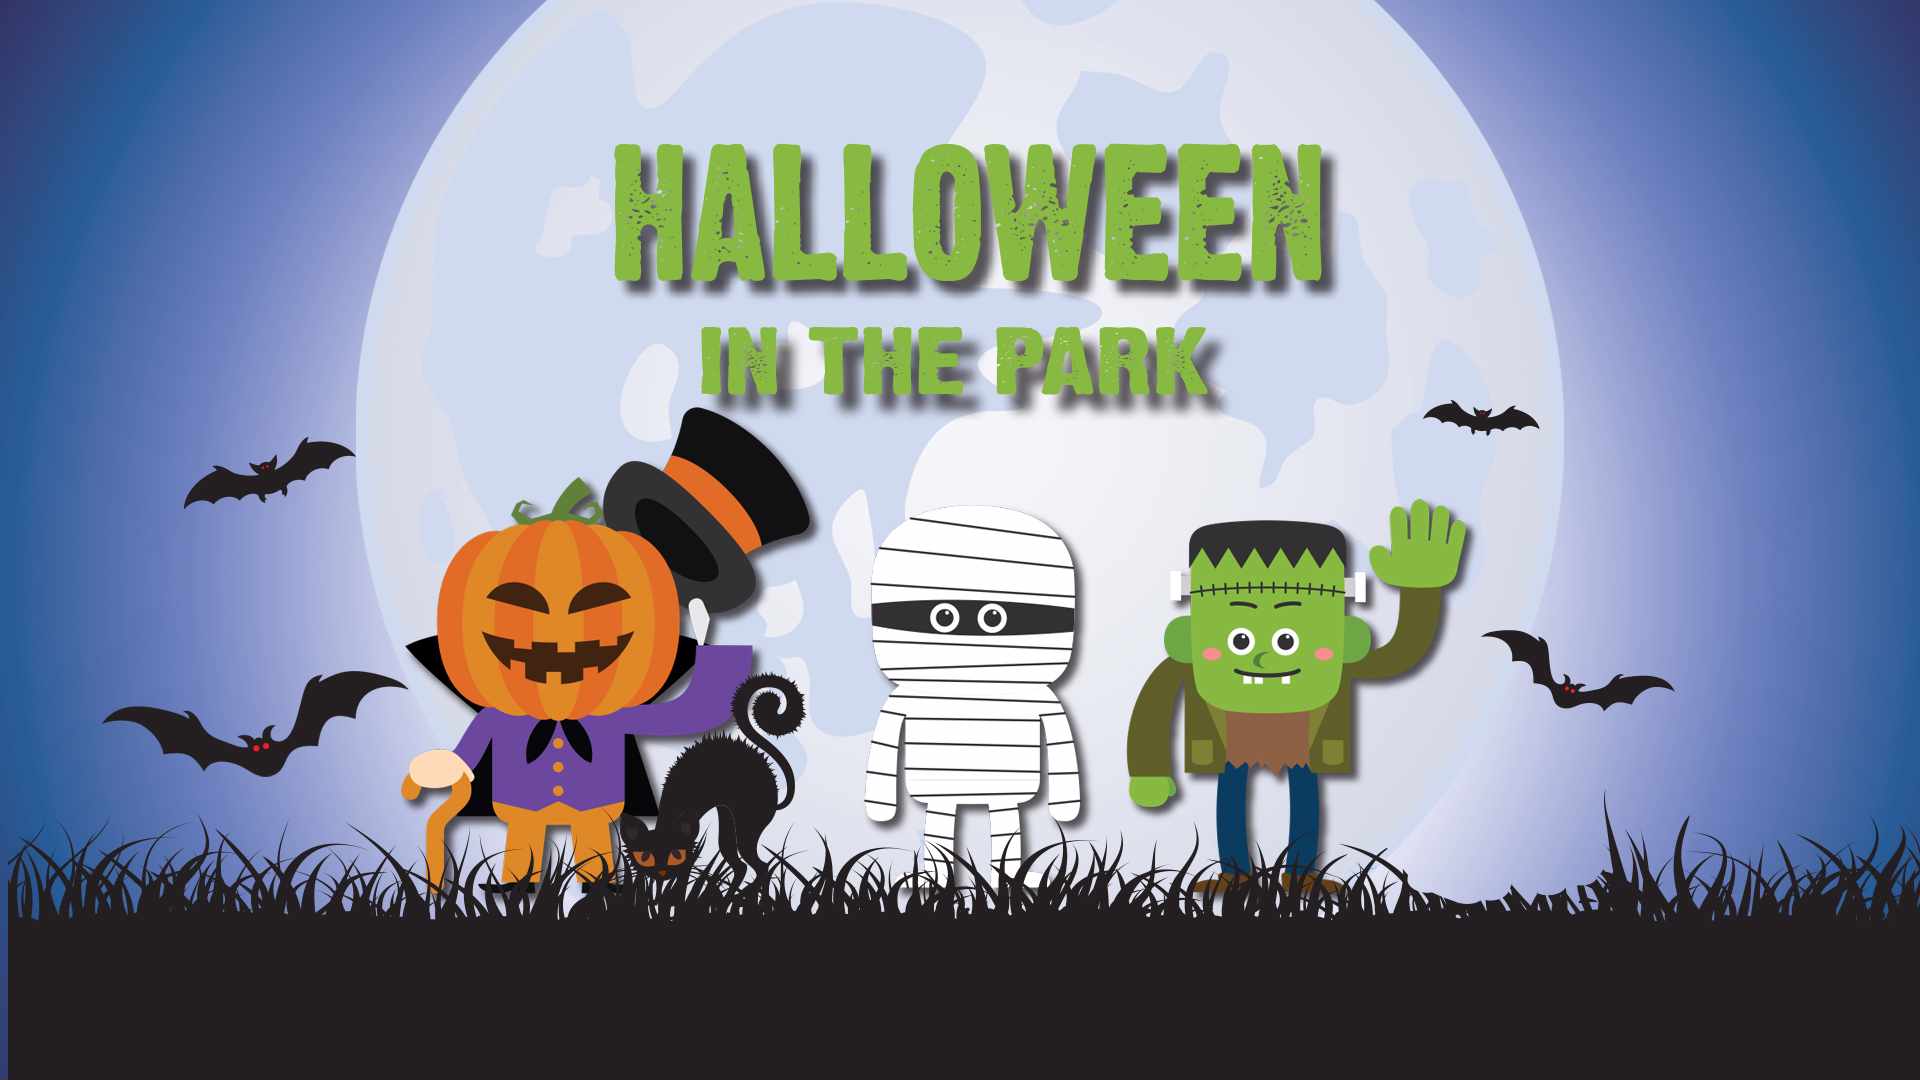 Volunteers: the Shade Gap Elementary PTO with their Halloween in the Park event on Friday, October 21st.